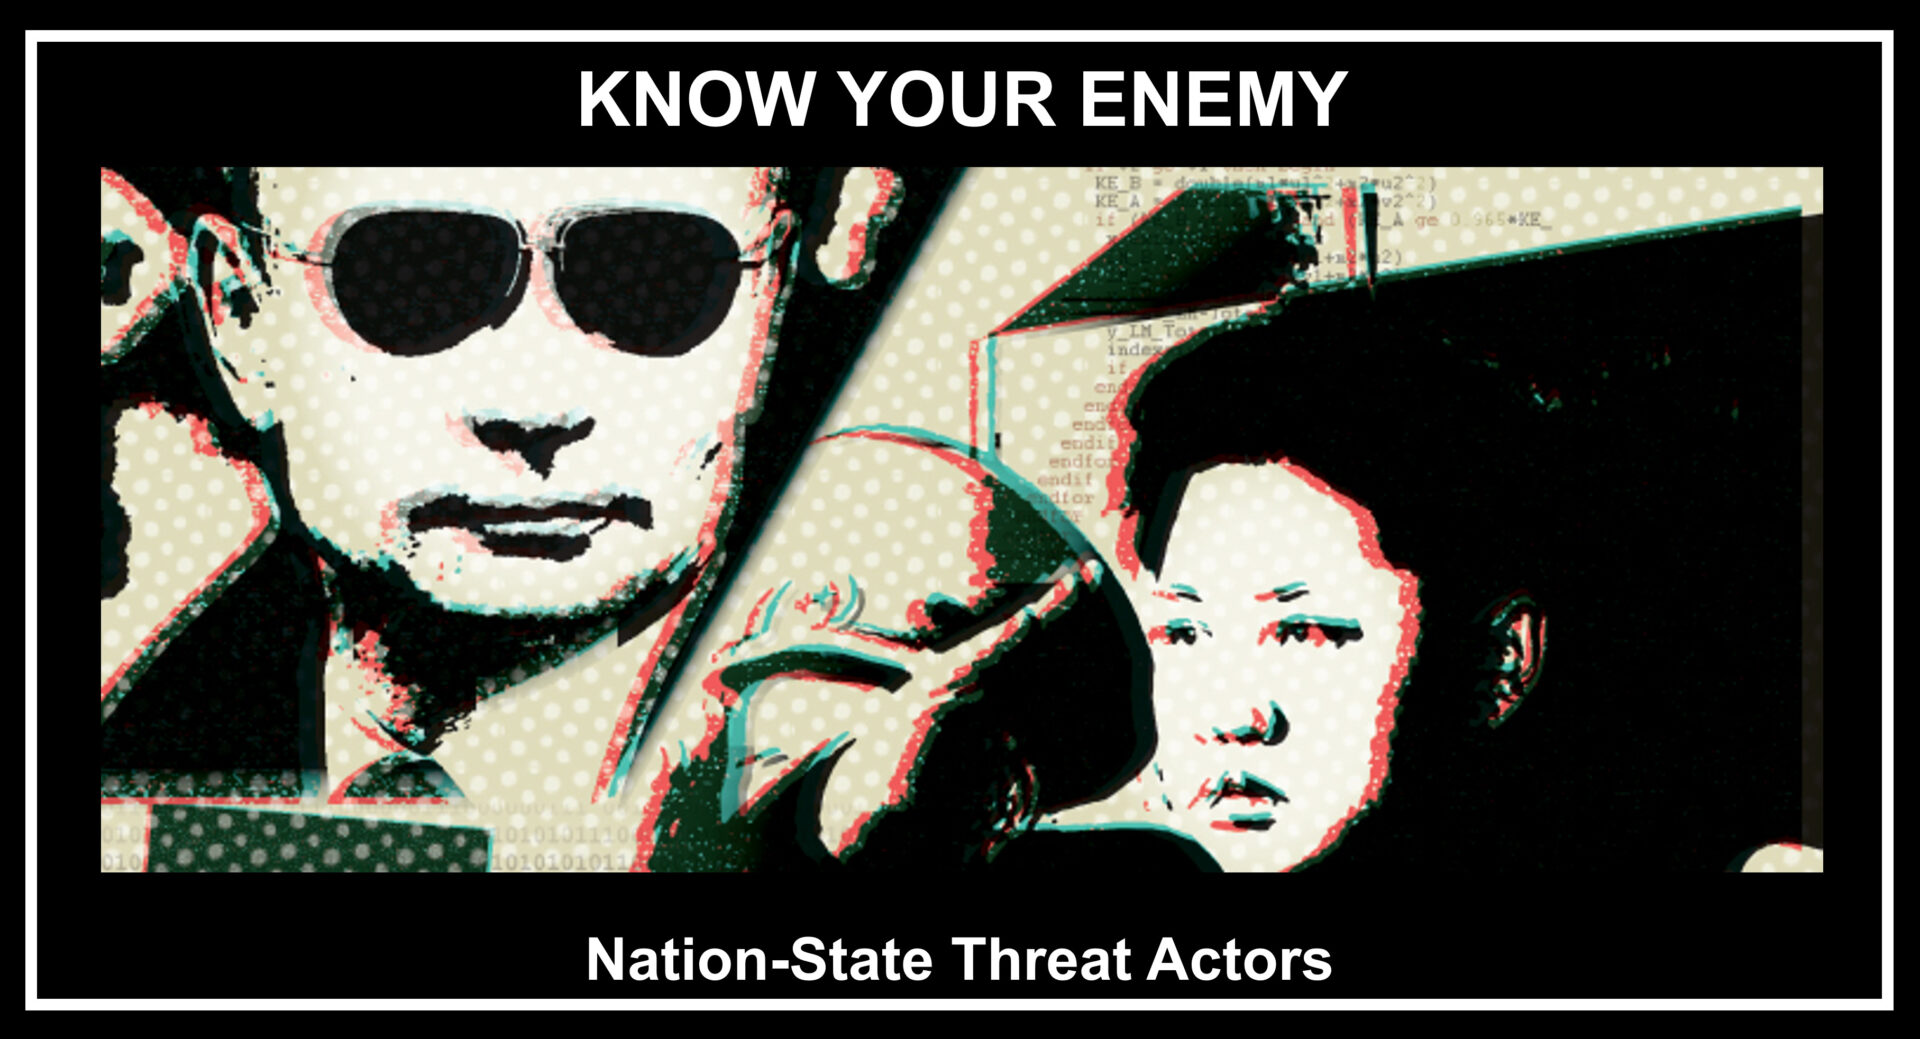 Know Your Enemy: Nation-State Threat Actors